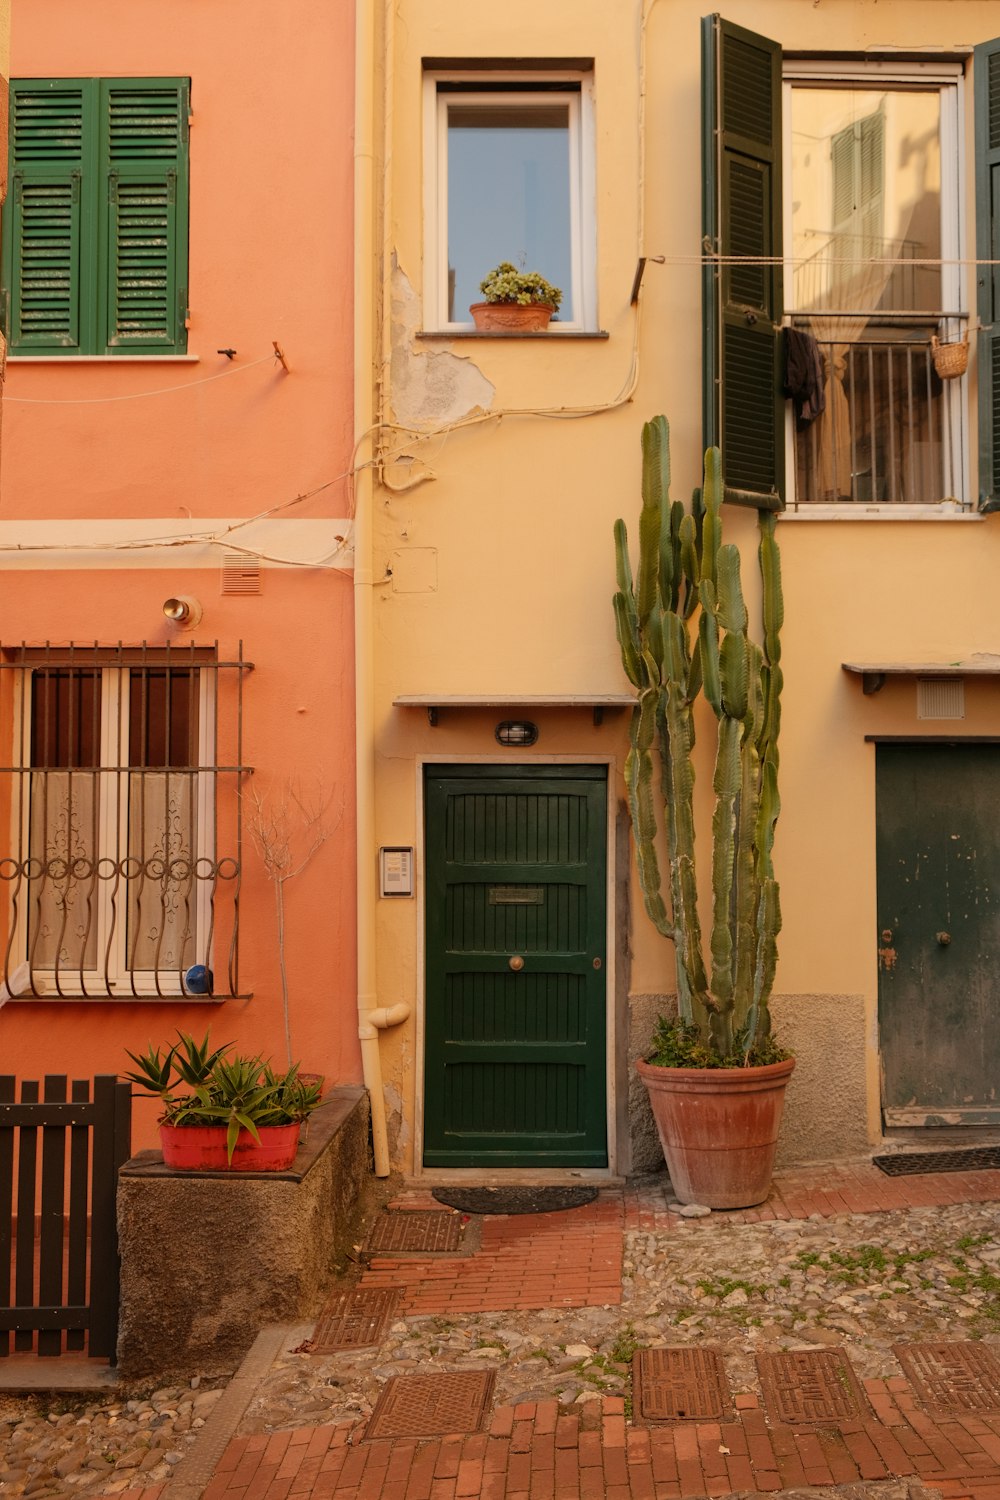 a building with green shutters and a cactus in a pot